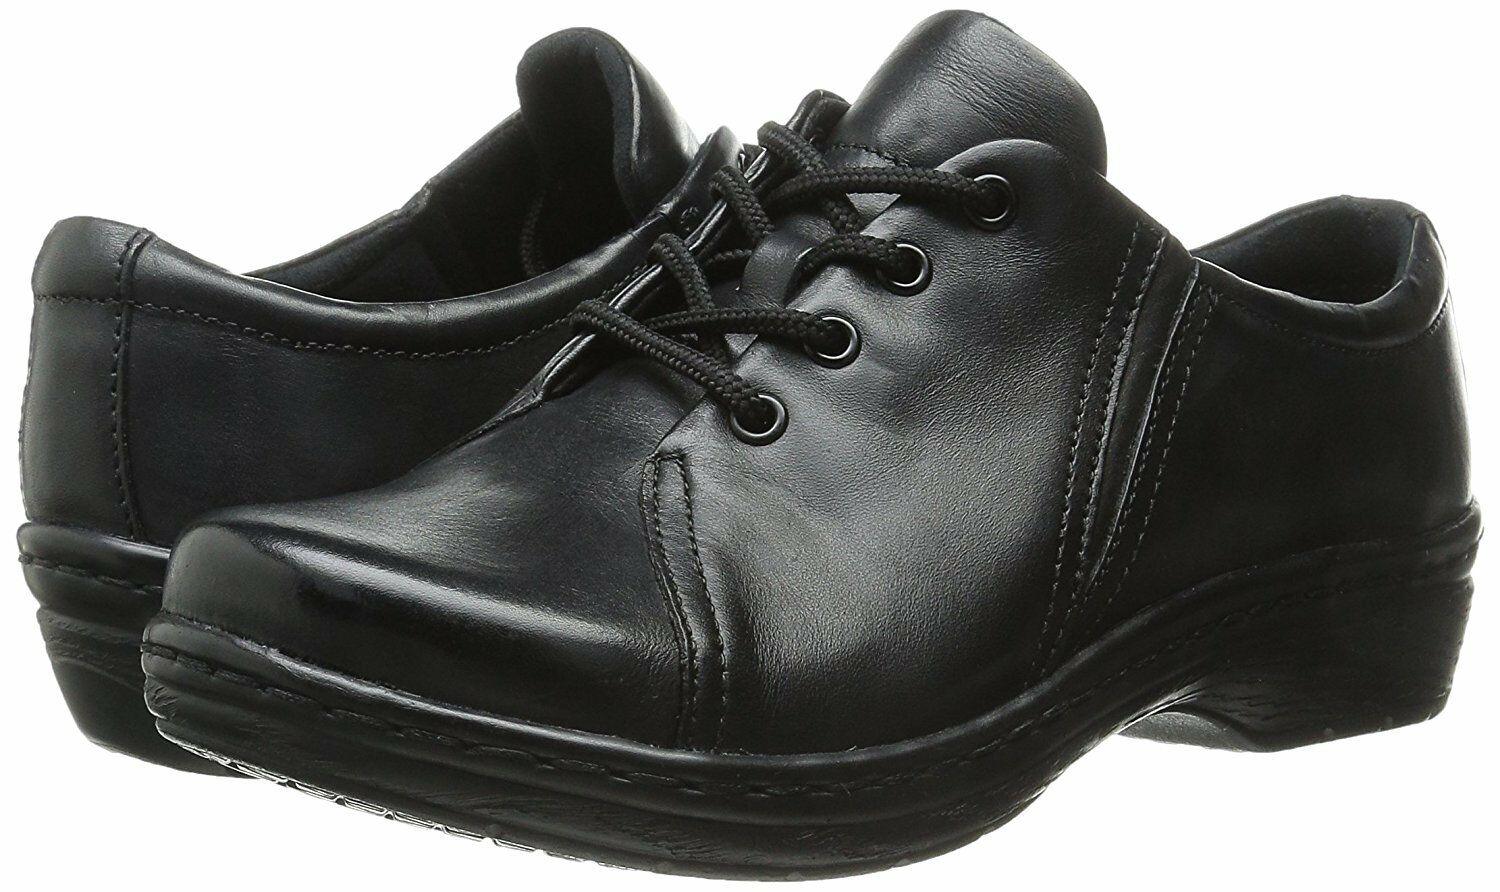 Klogs Illusion Womens  Black Leather Illusion Clog Lace Up Oxford Shoes  US 6 - SVNYFancy